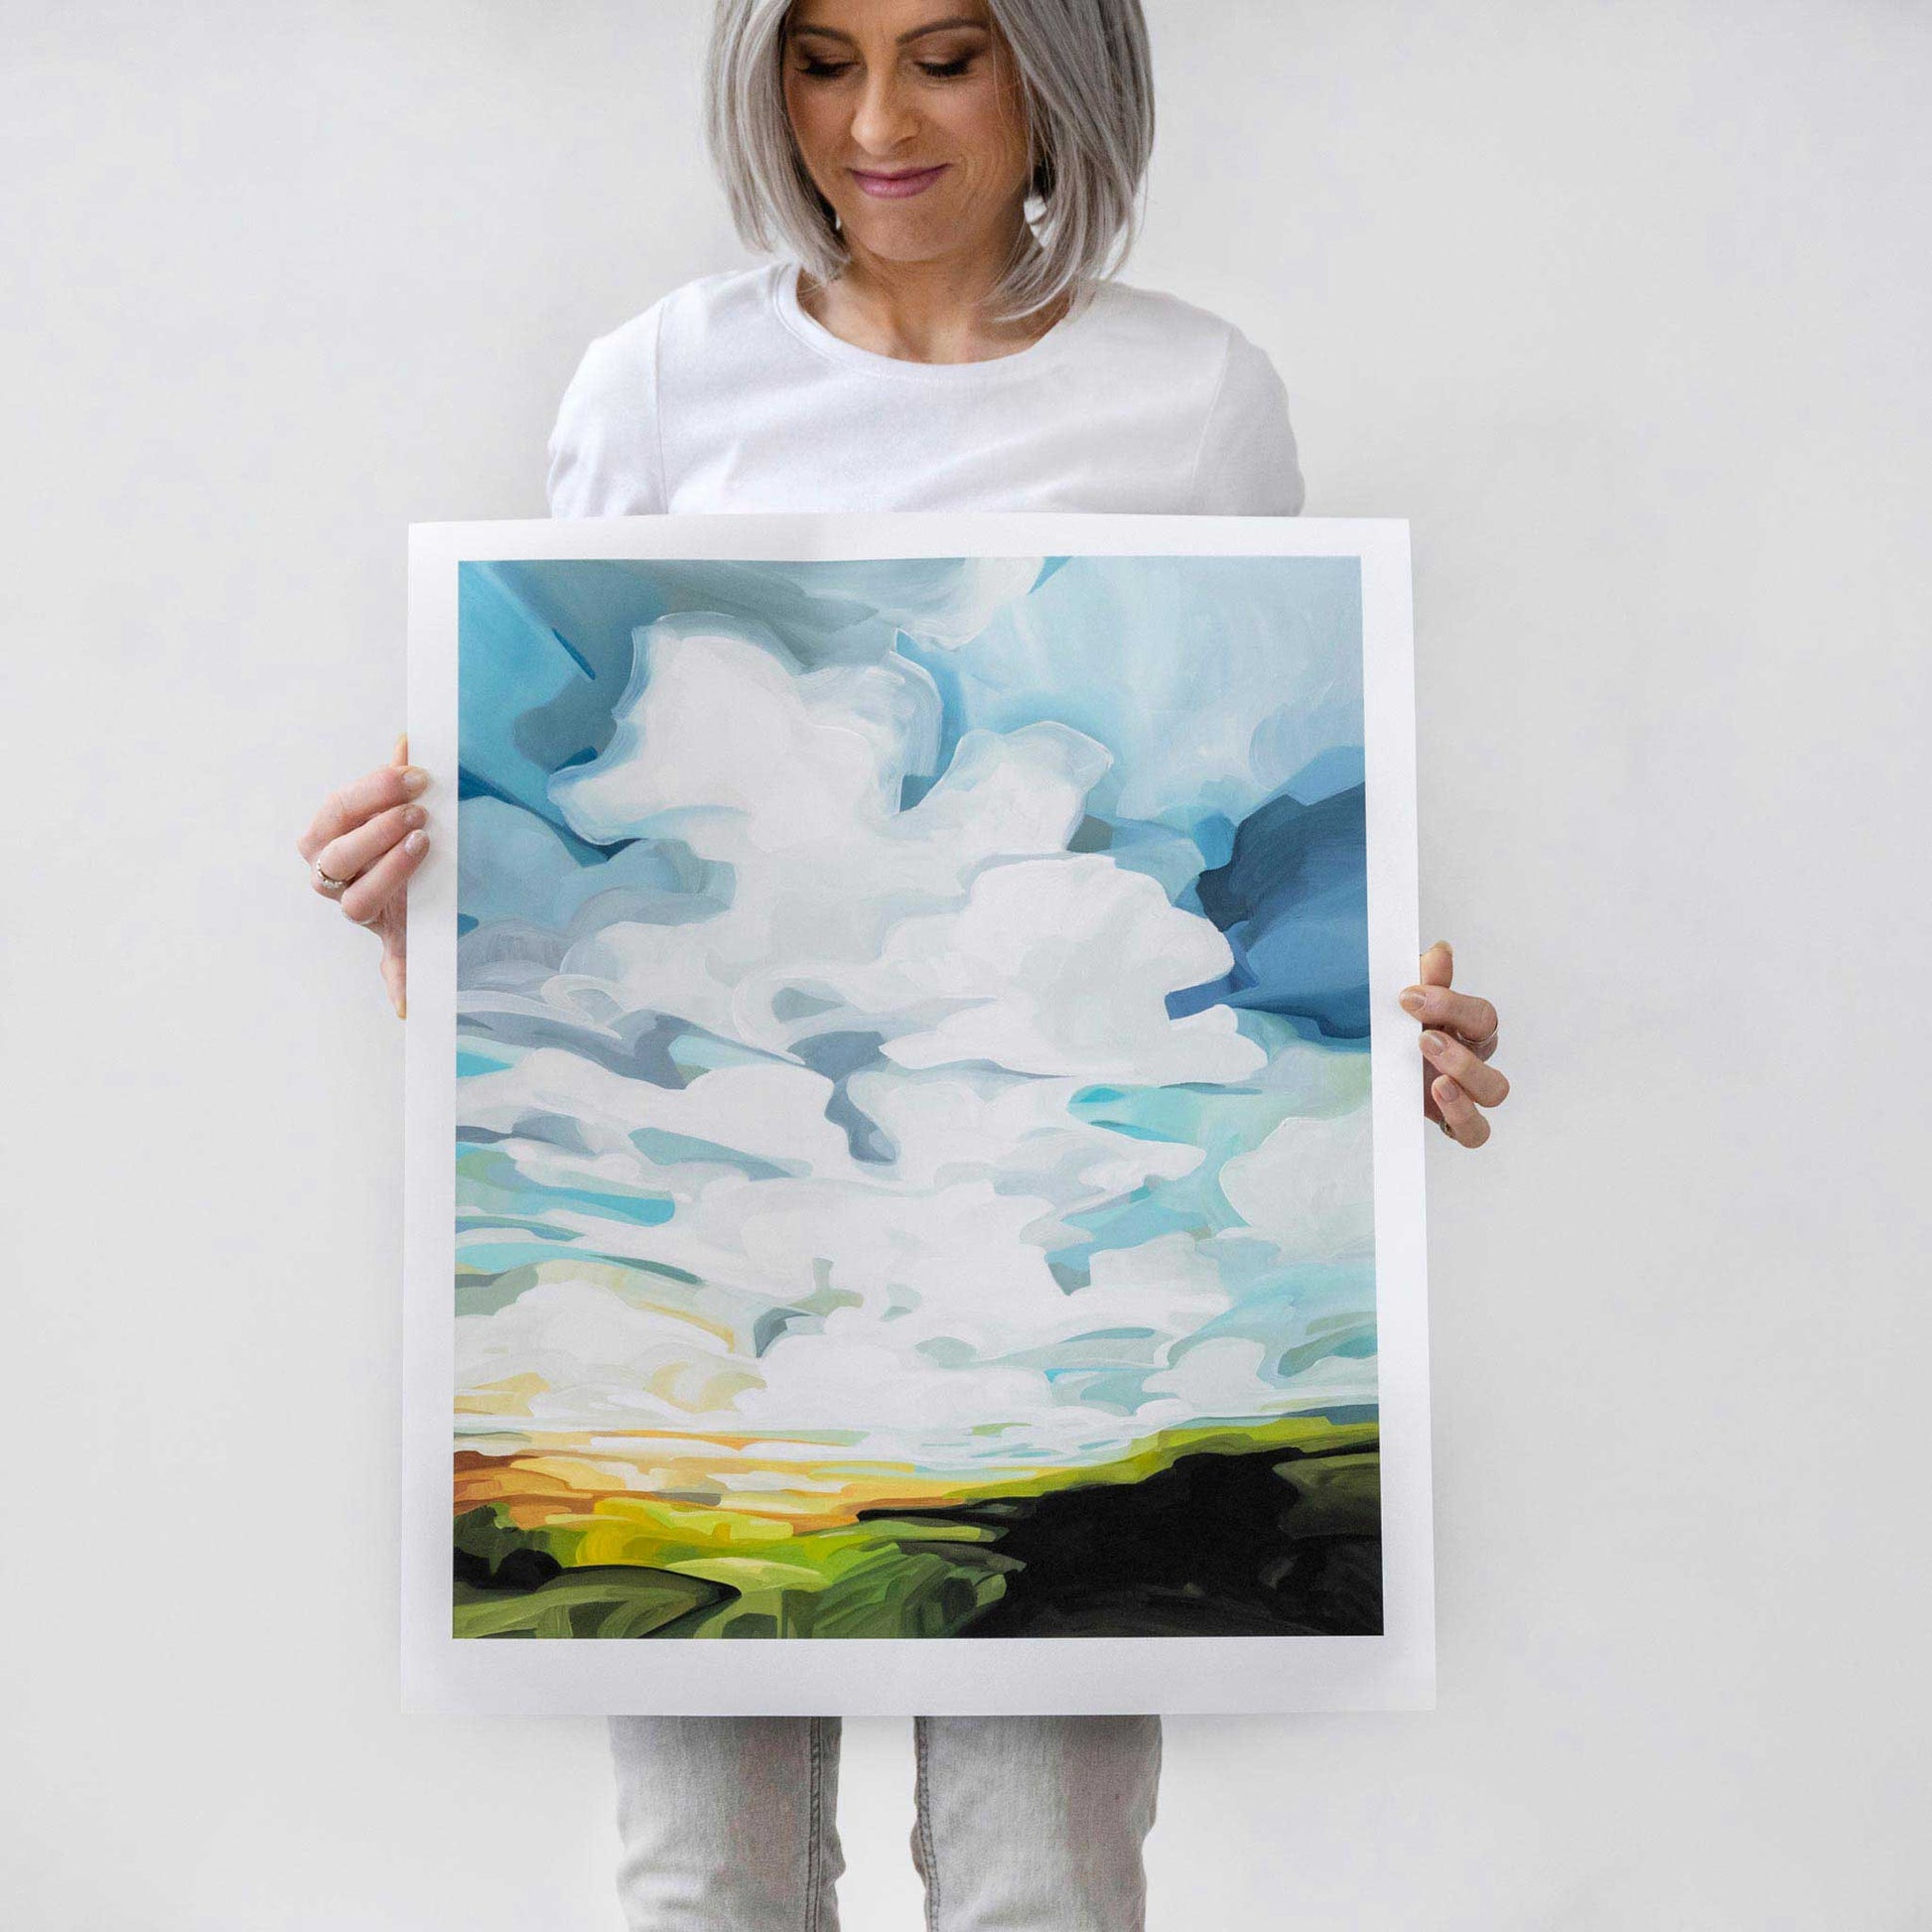 artist holding a limited edition fine art print of an acrylic landscape painting